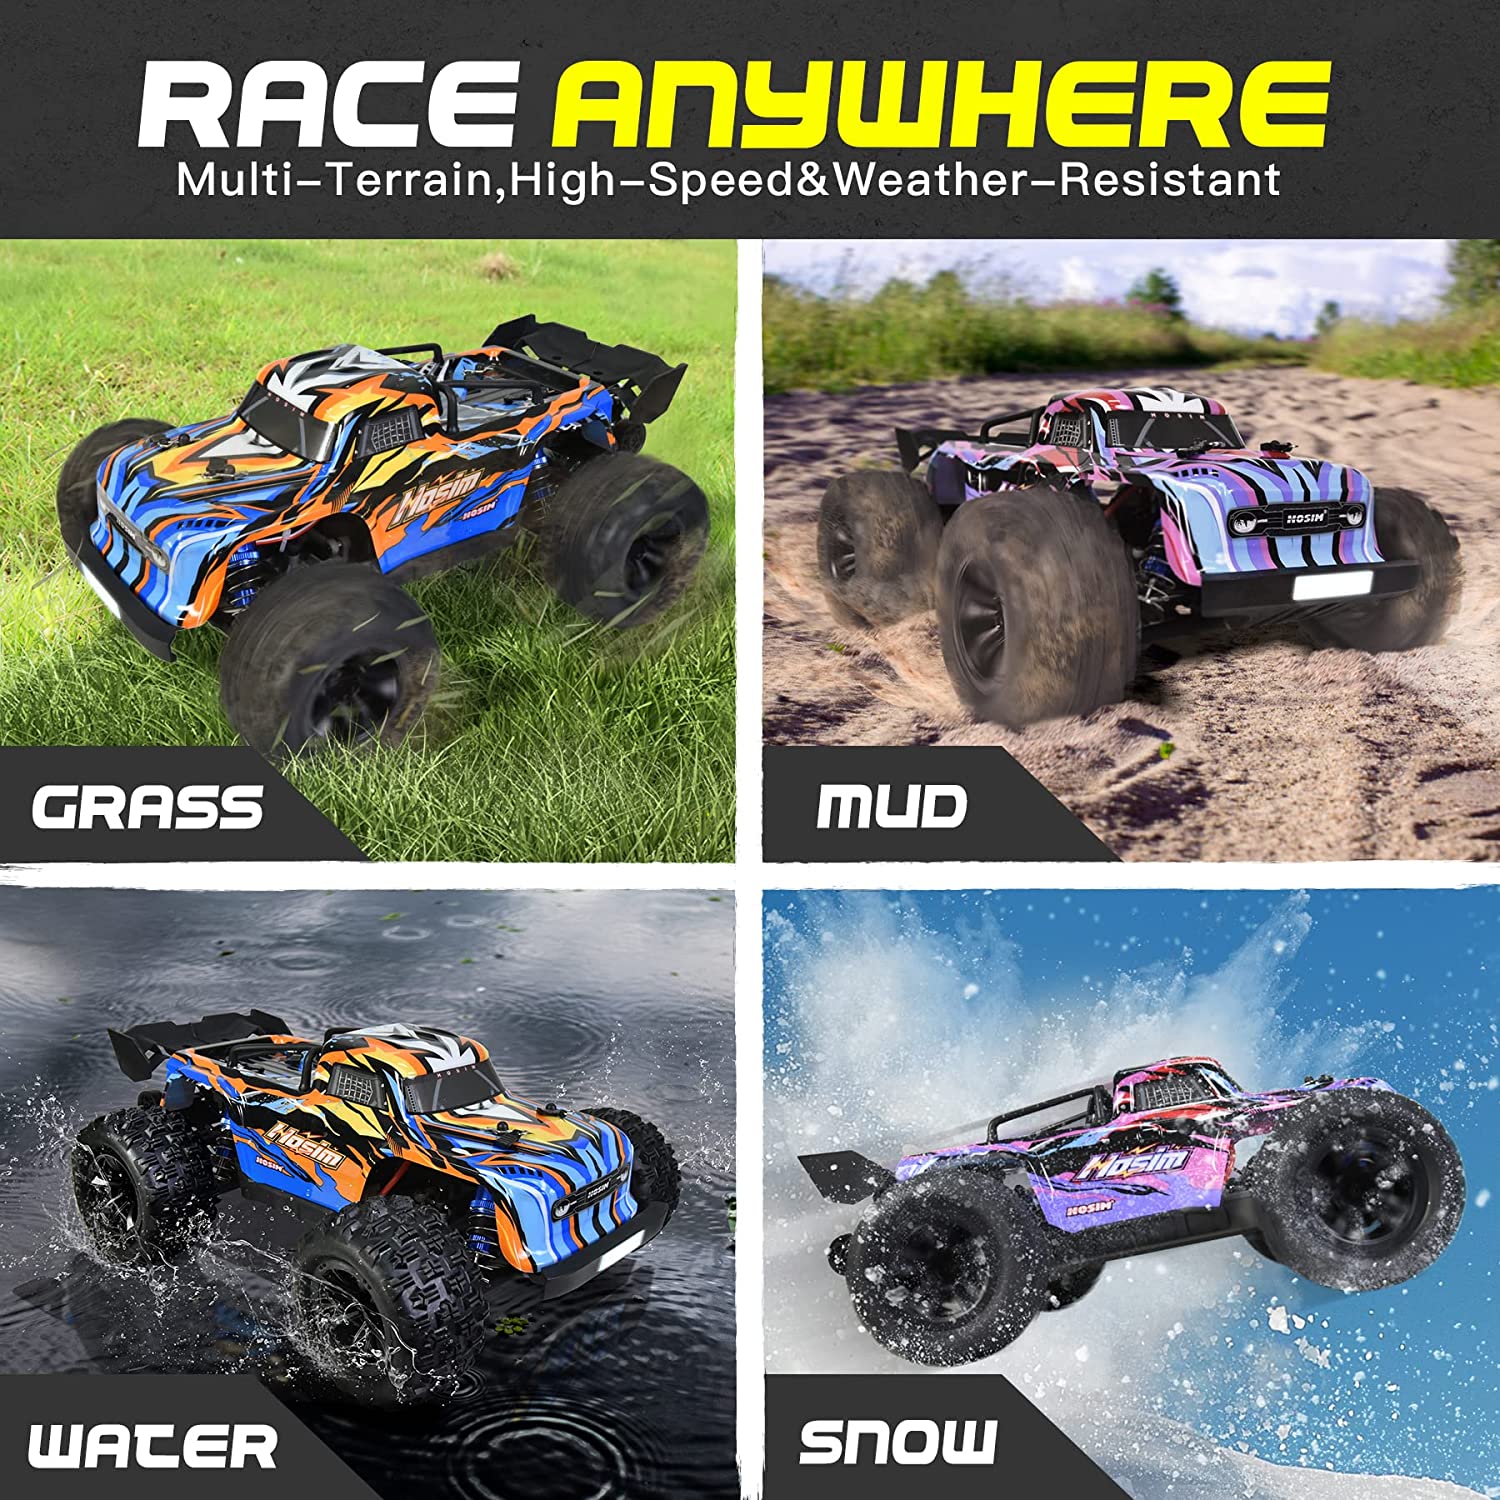 Hosim RC Car 1:16 Scale 40+KPH All Terrain Remote Control Car ,4WD Waterproof High Speed Electric Toy Off Road RC Monster Truck Vehicle Crawler for Boys Kids and Adults